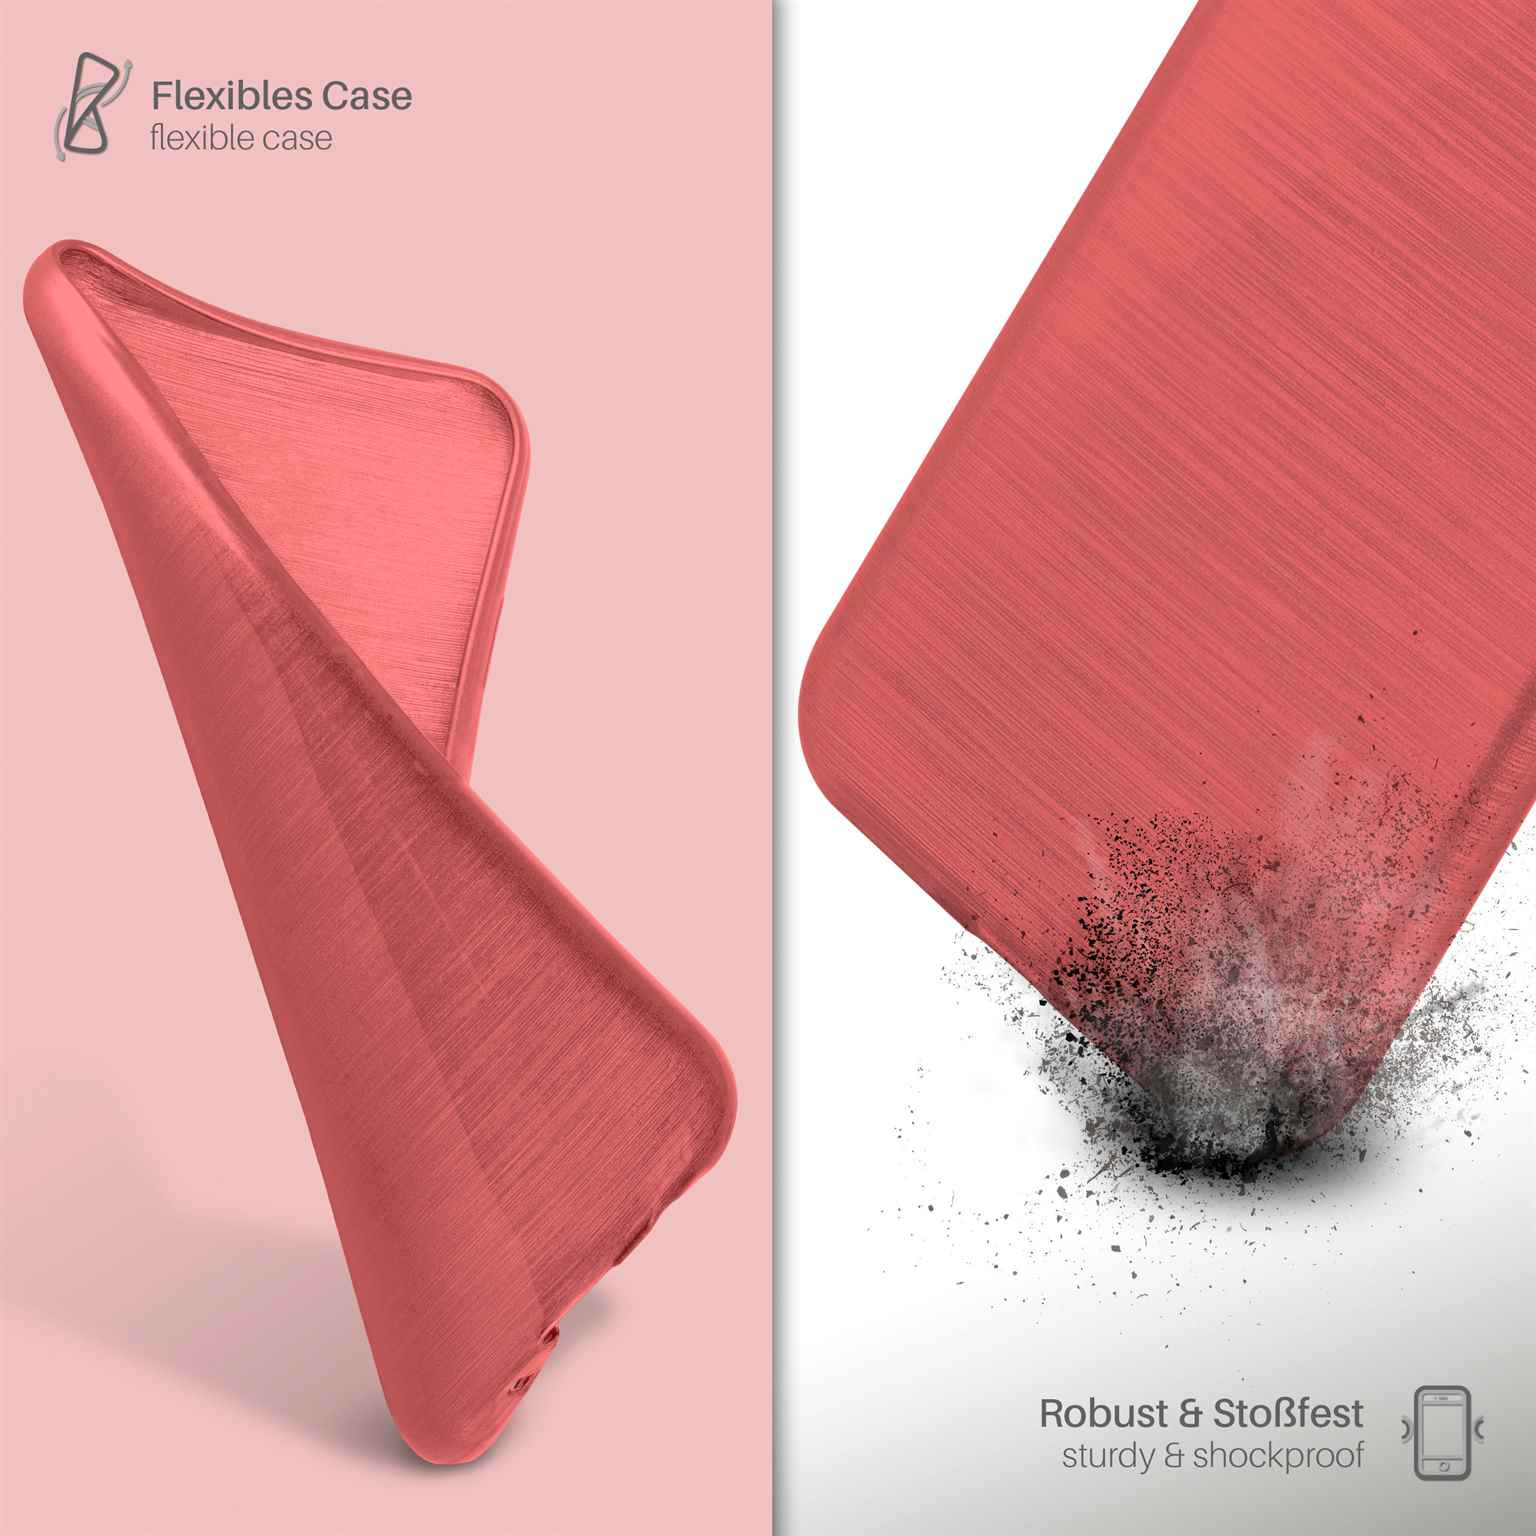 MOEX Brushed Case, Backcover, Samsung, Coral-Red Galaxy S8